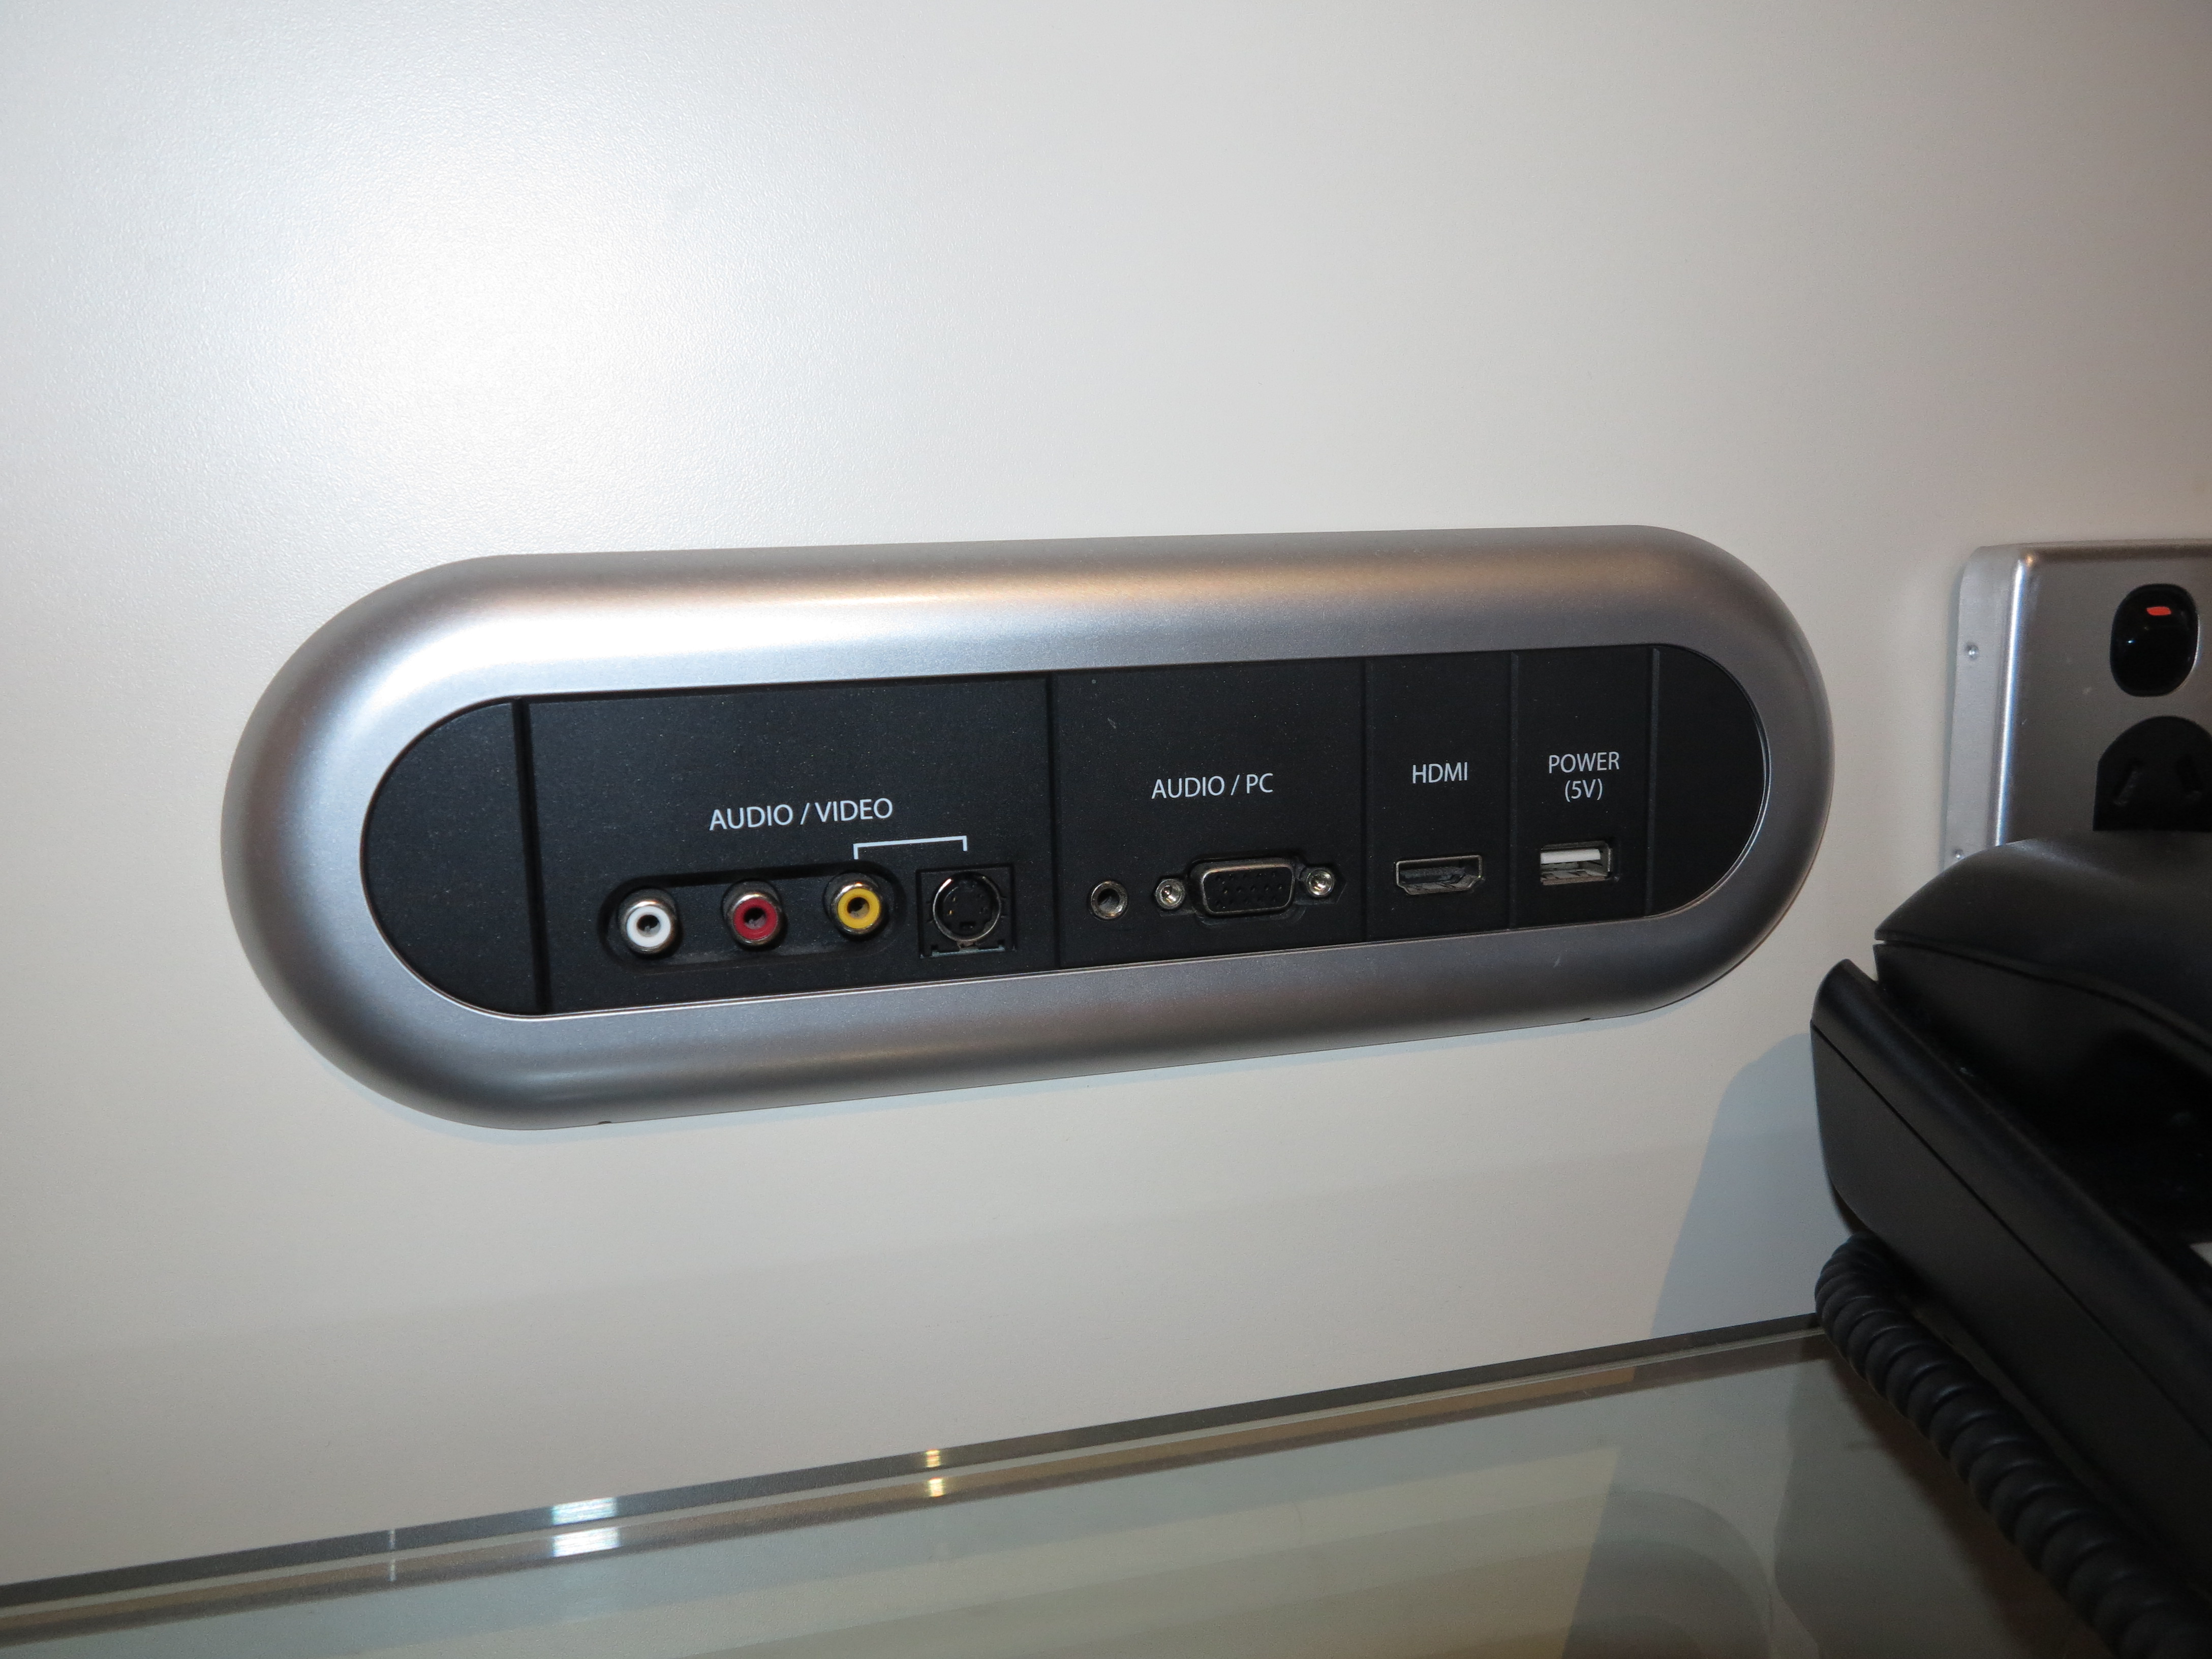 The AV connection panels in hotel rooms–a very useful amenity for the connected user